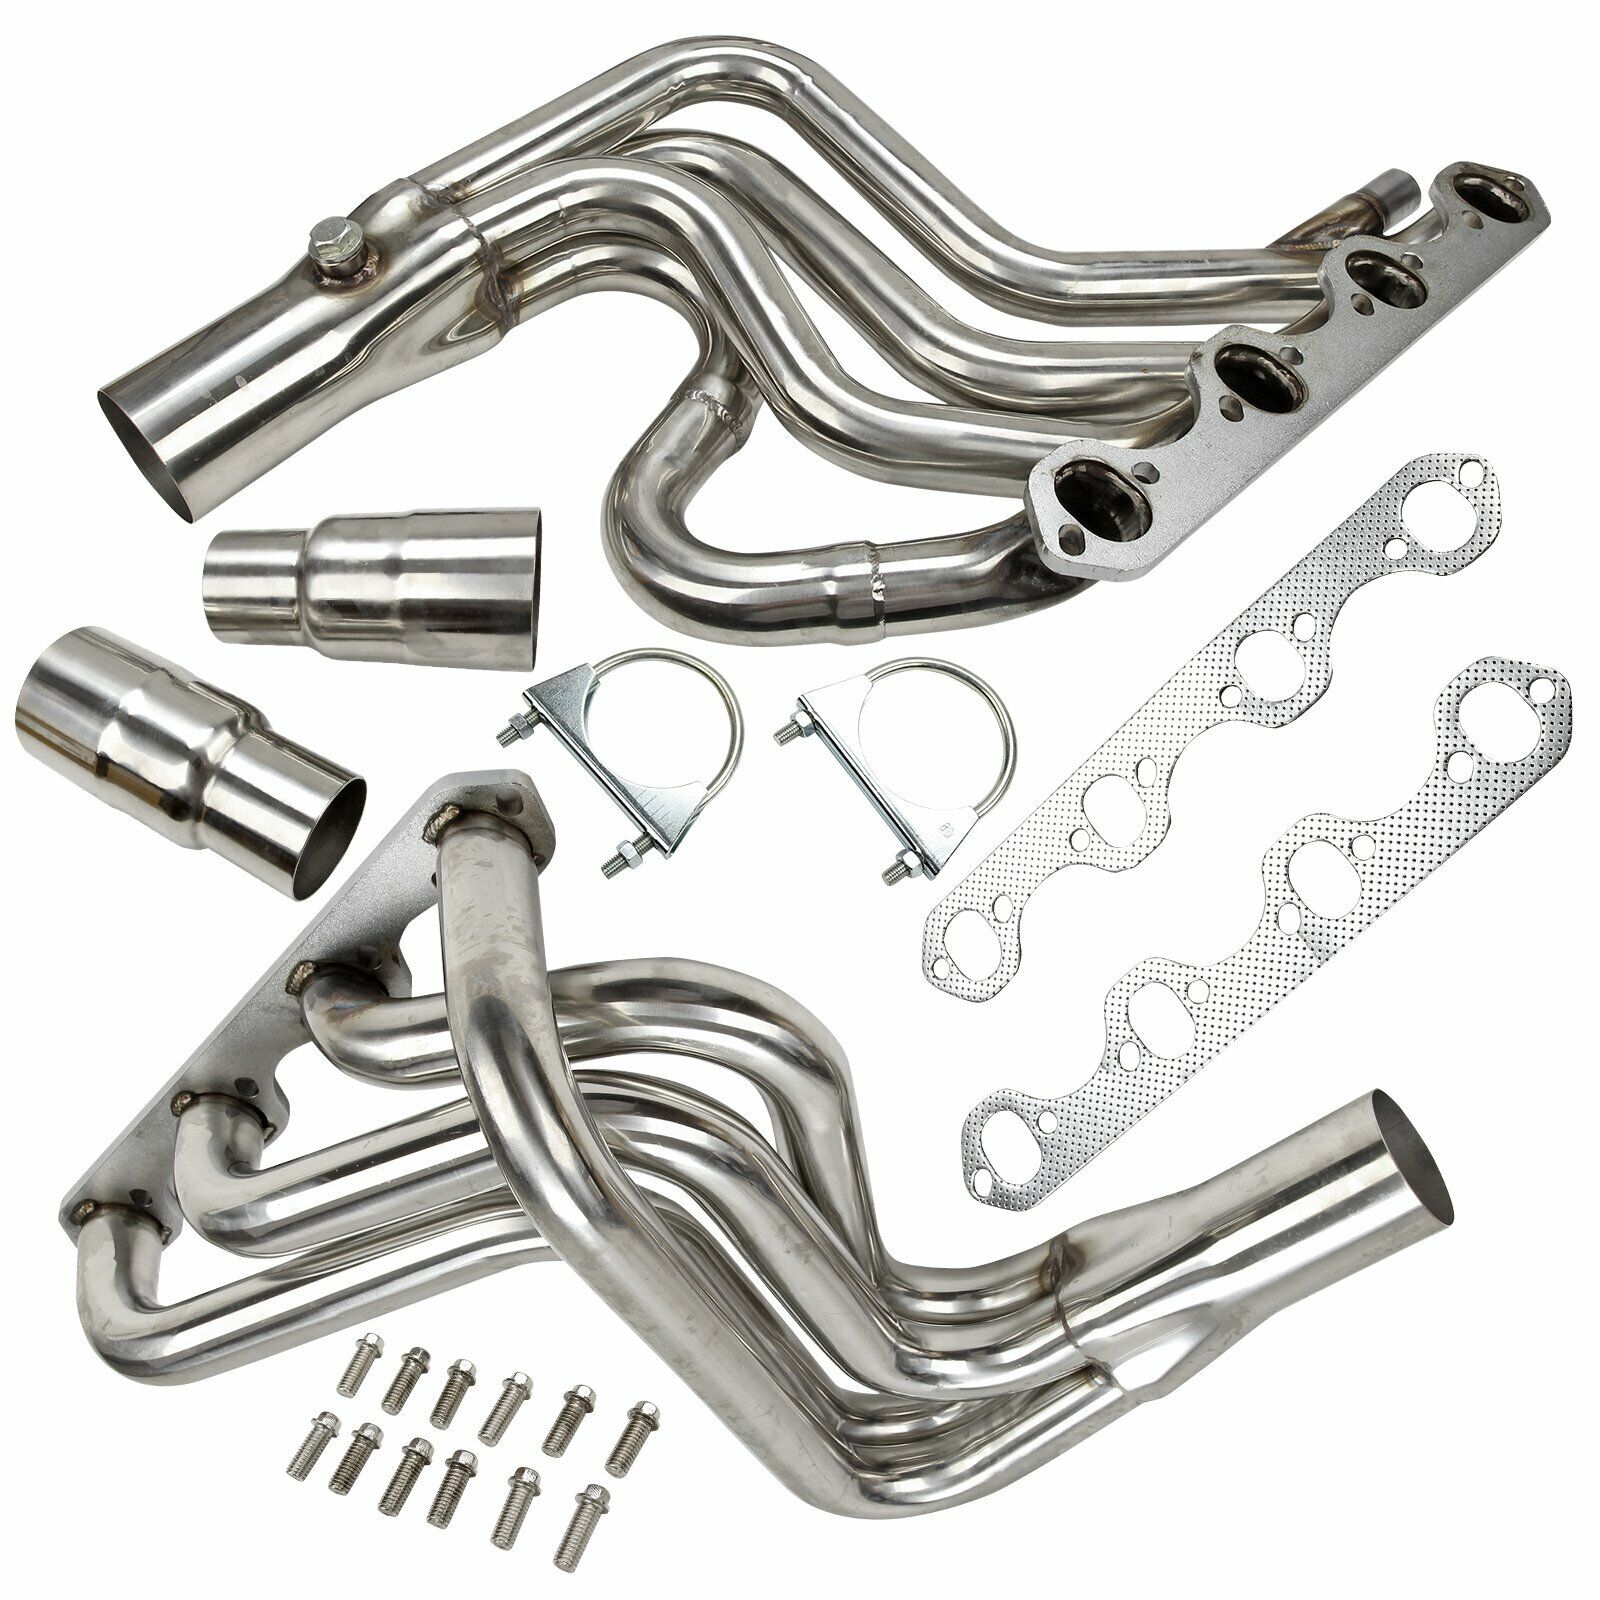 FitS Ford F150 F250 Bronco 5.8L V8 Stainless Steel Manifold Exhaust Header 87-96